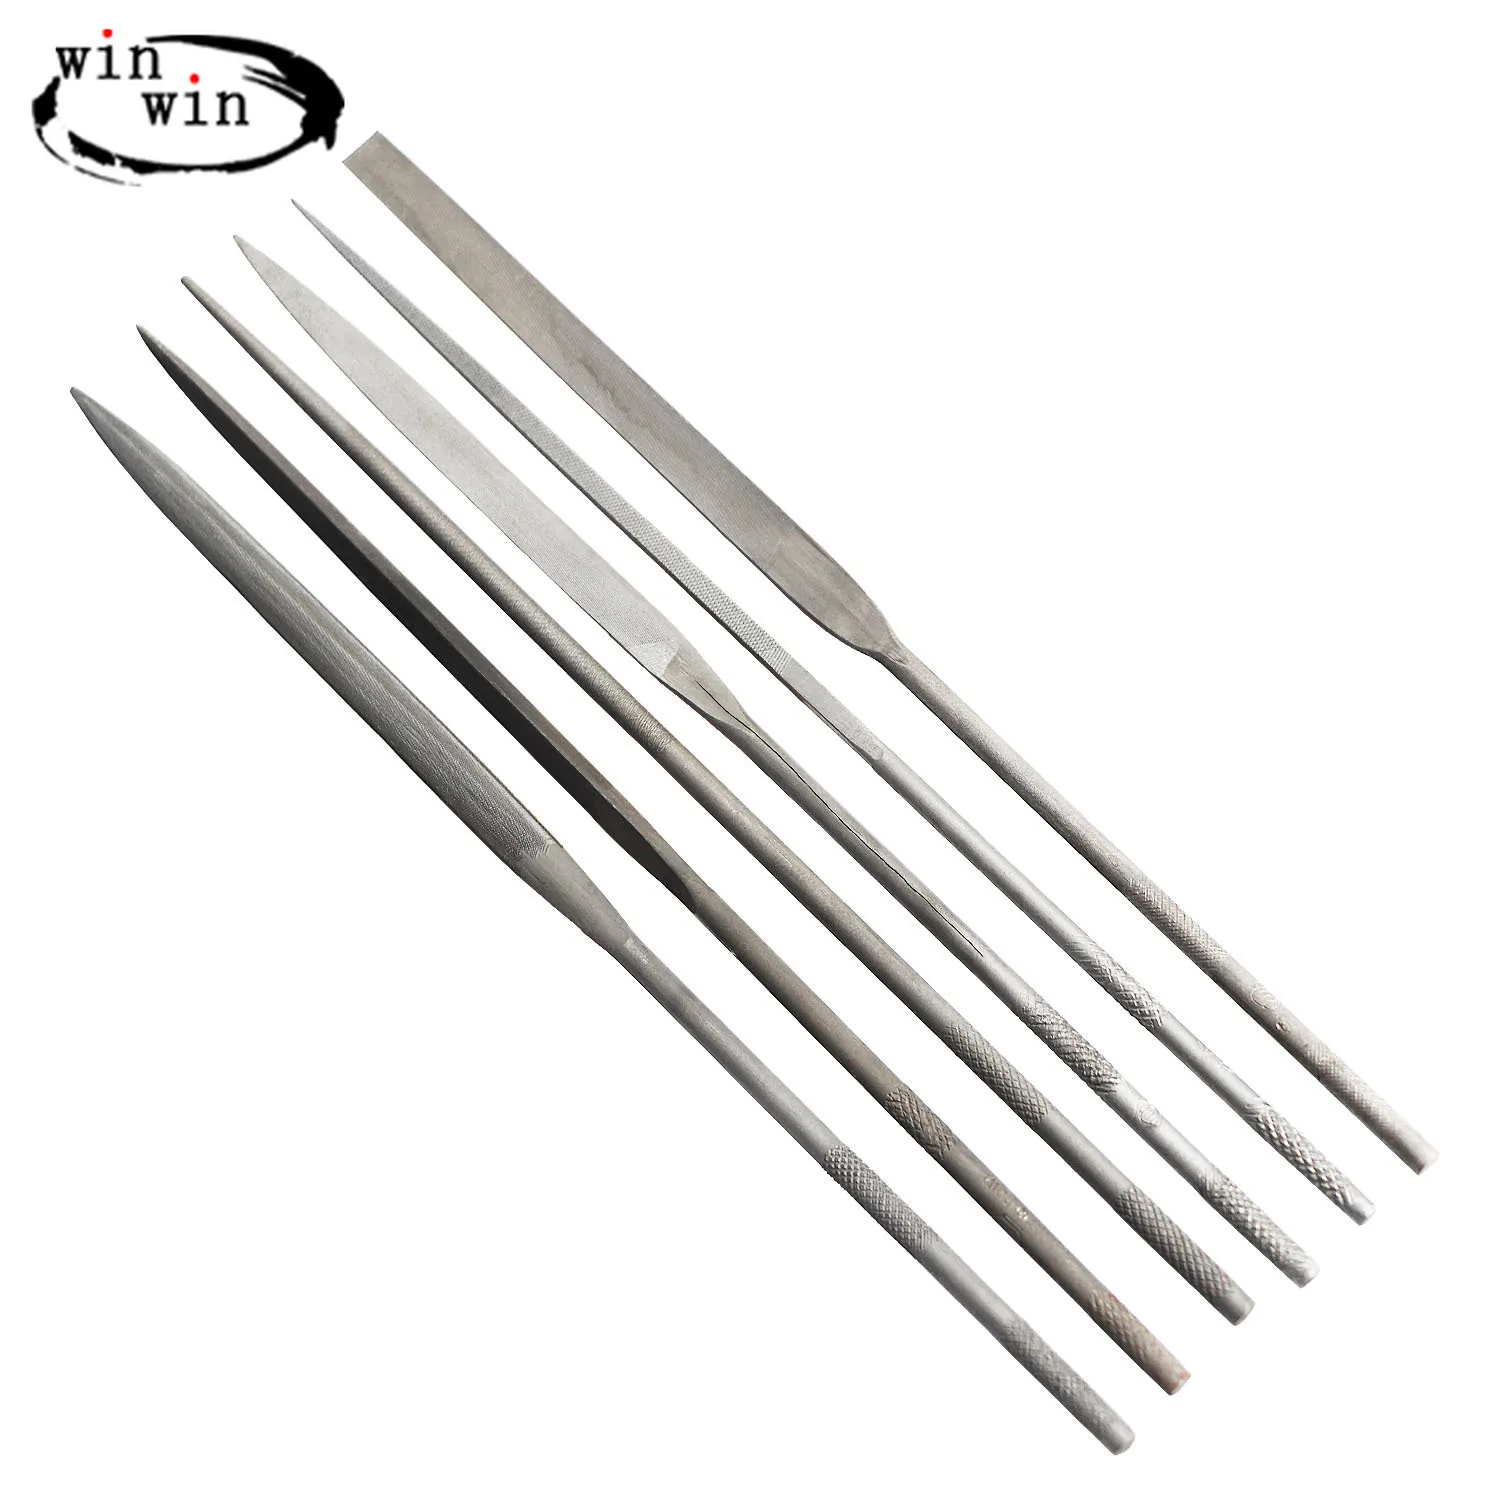 6 in 1 Shaping Files Fine Files Flat-Headed Flat Files Clay Sculpting Tool Set Pointed Square Files Bamboo Leaf Files